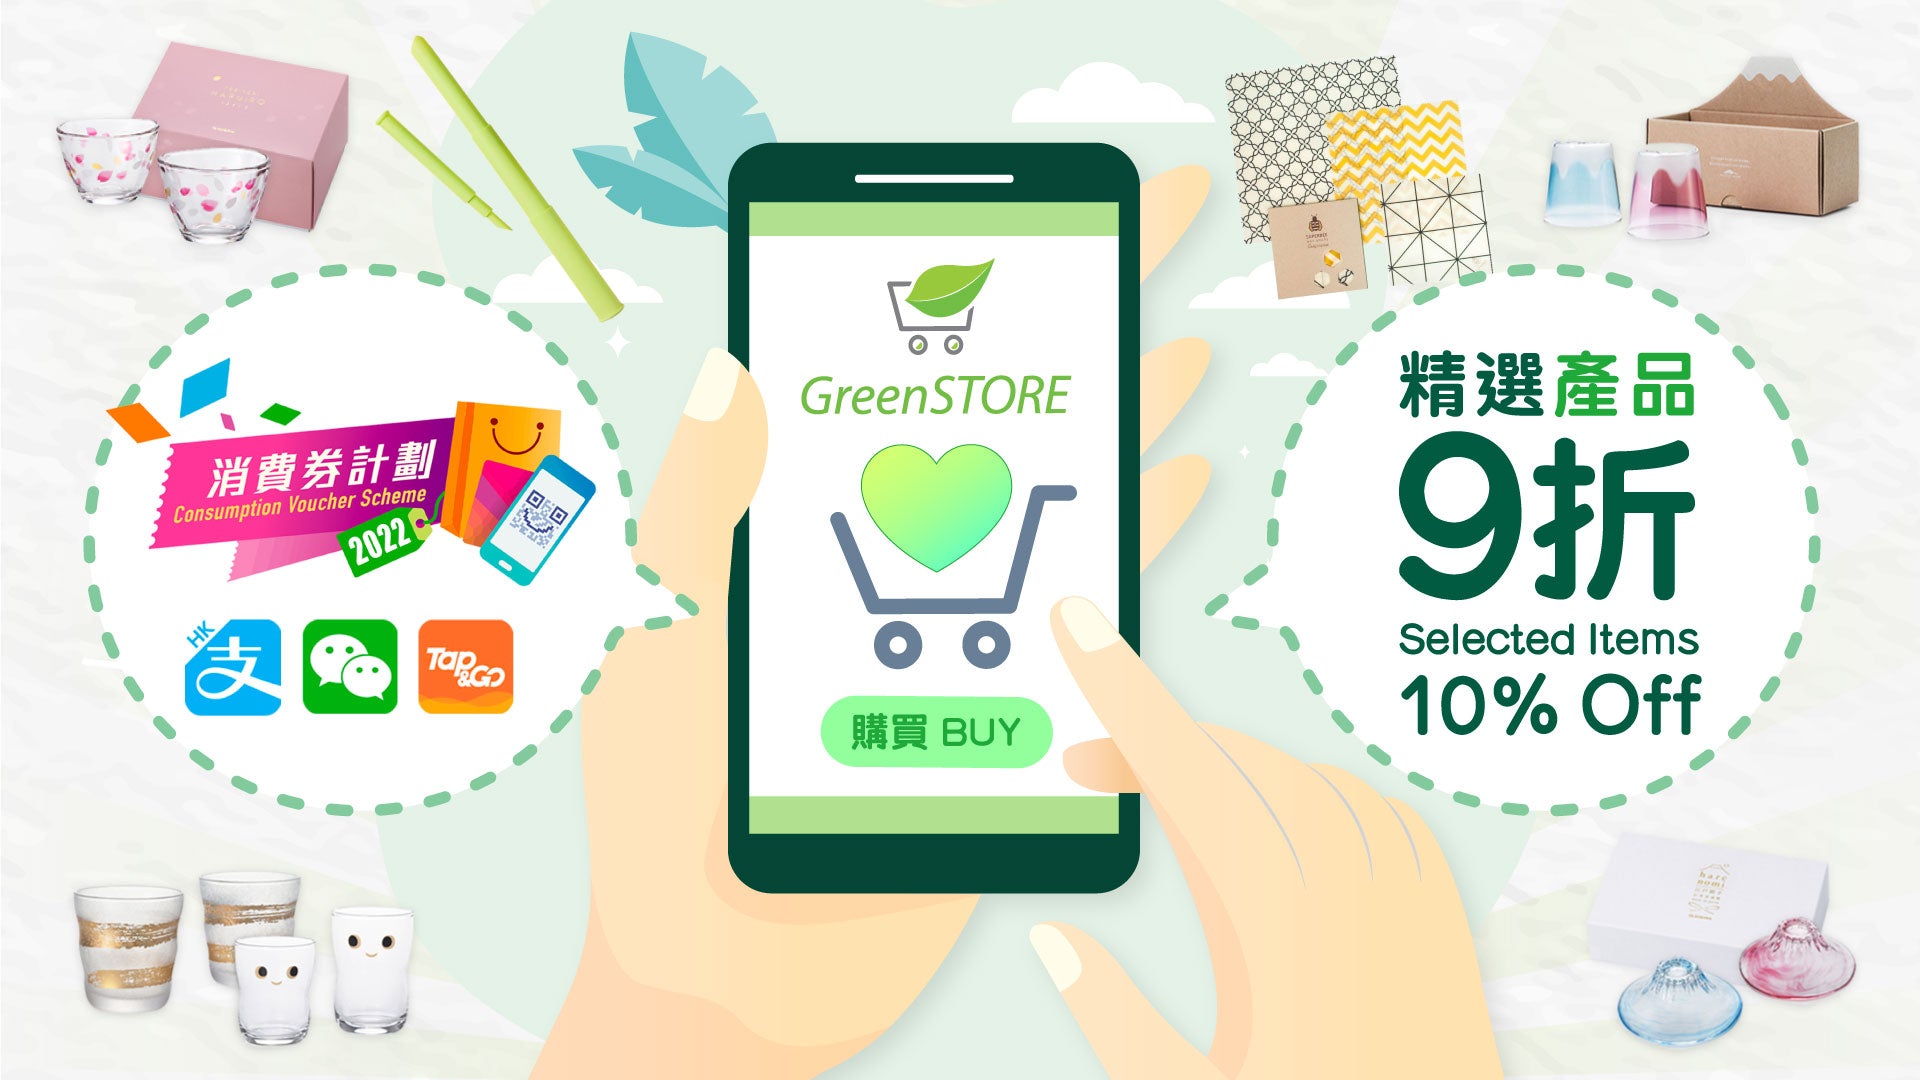 【Consumption Vouchers】<br>2nd Instalment Has Come!</br>3 Steps to Earn Up to $100 GreenSTORE Rewards